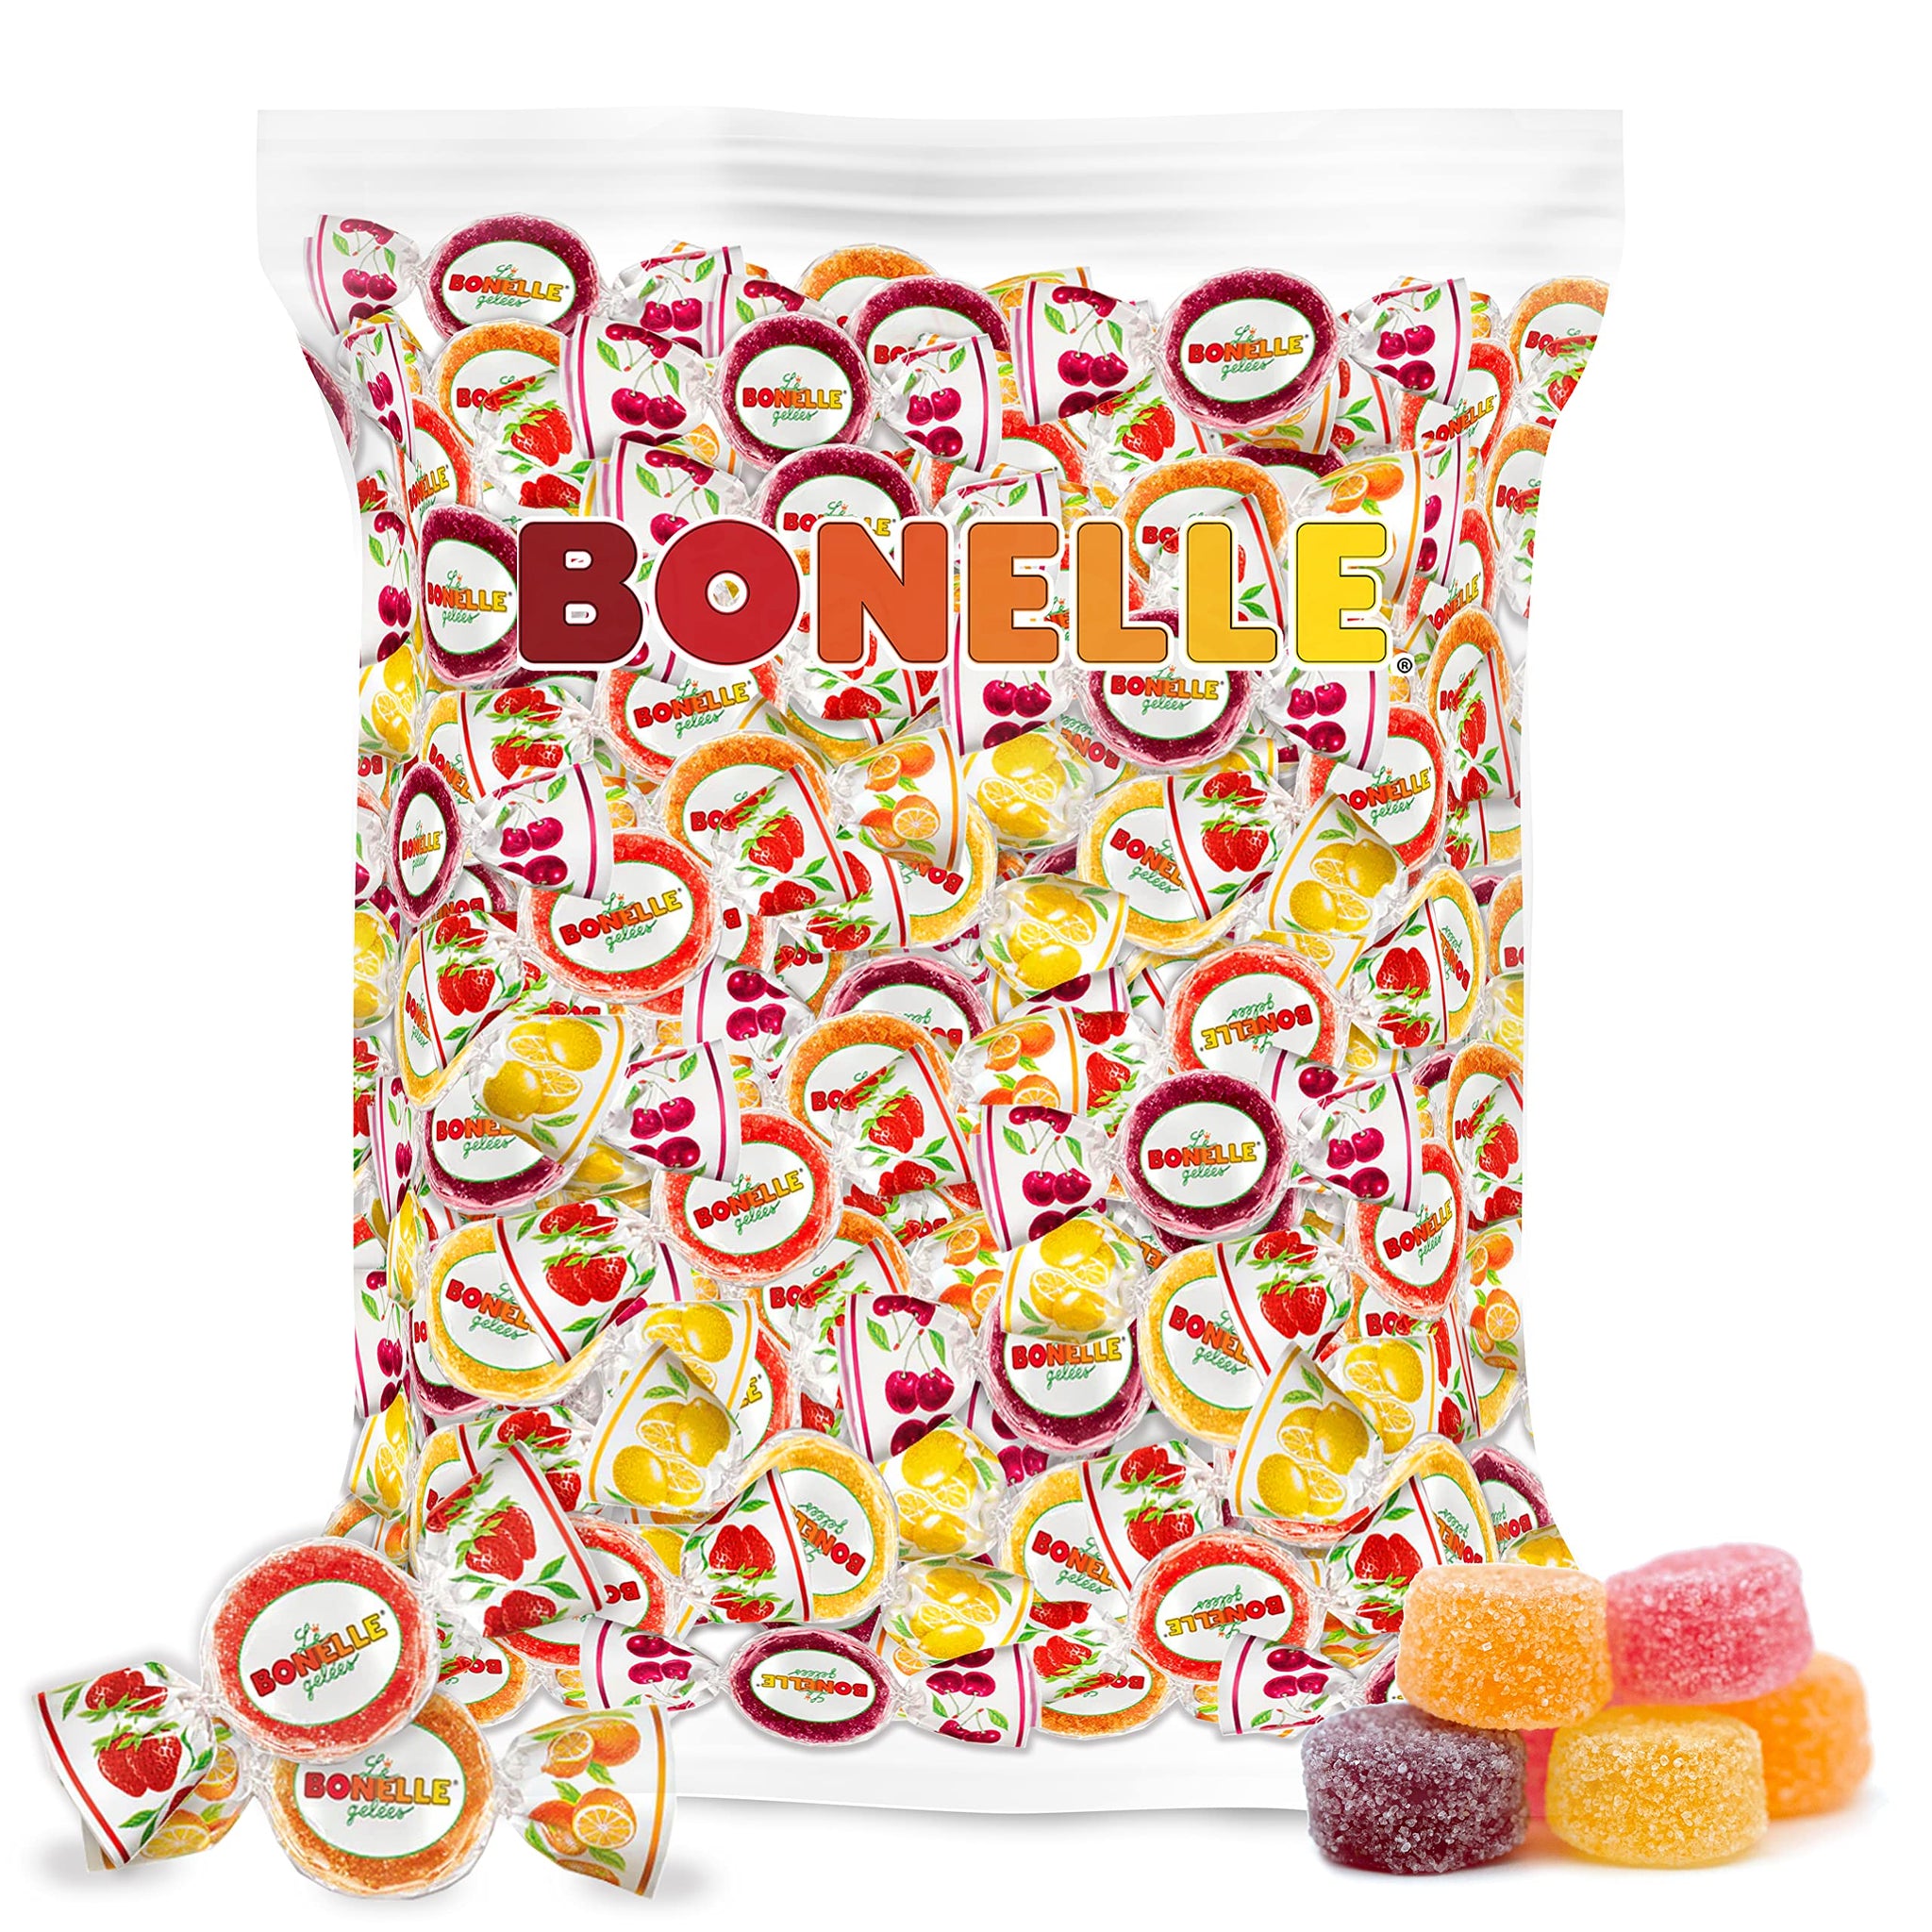 Fida Bonelle Italian Assorted Fruit Jelly Candy, Individually Wrapped, Vegan, 1 Pound Bag.